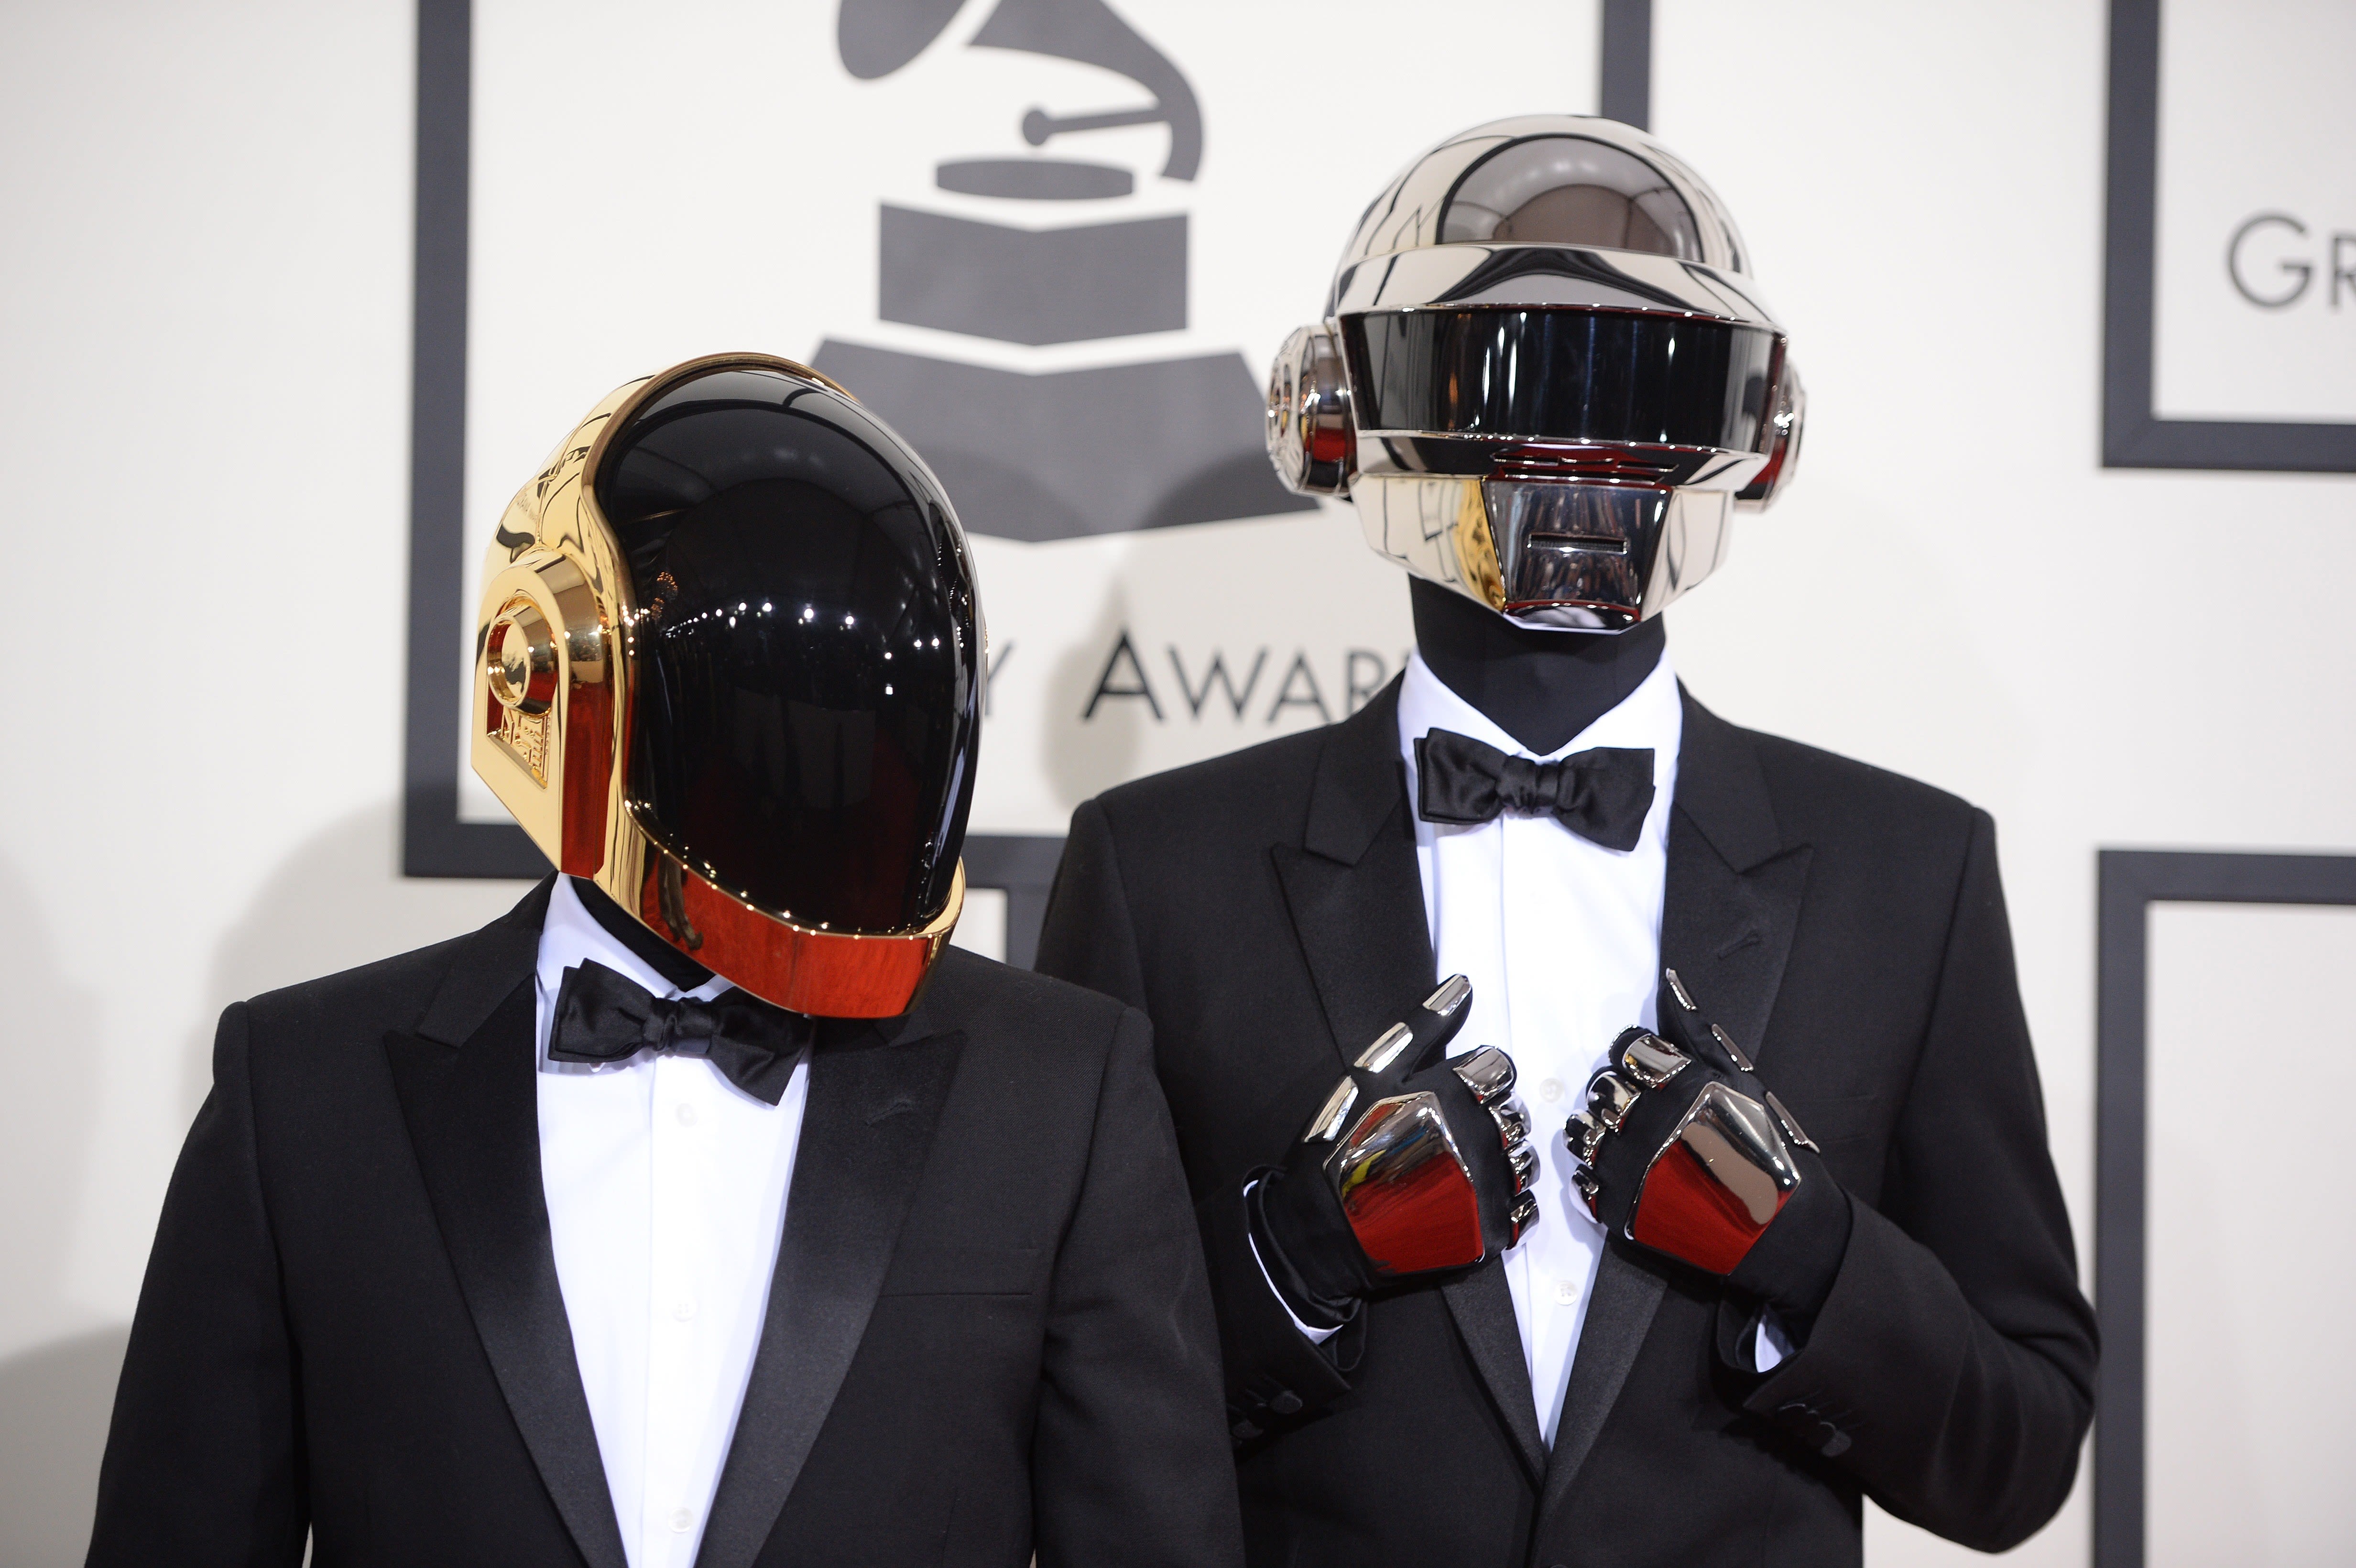 Listen to Daft Punk's most memorable songs